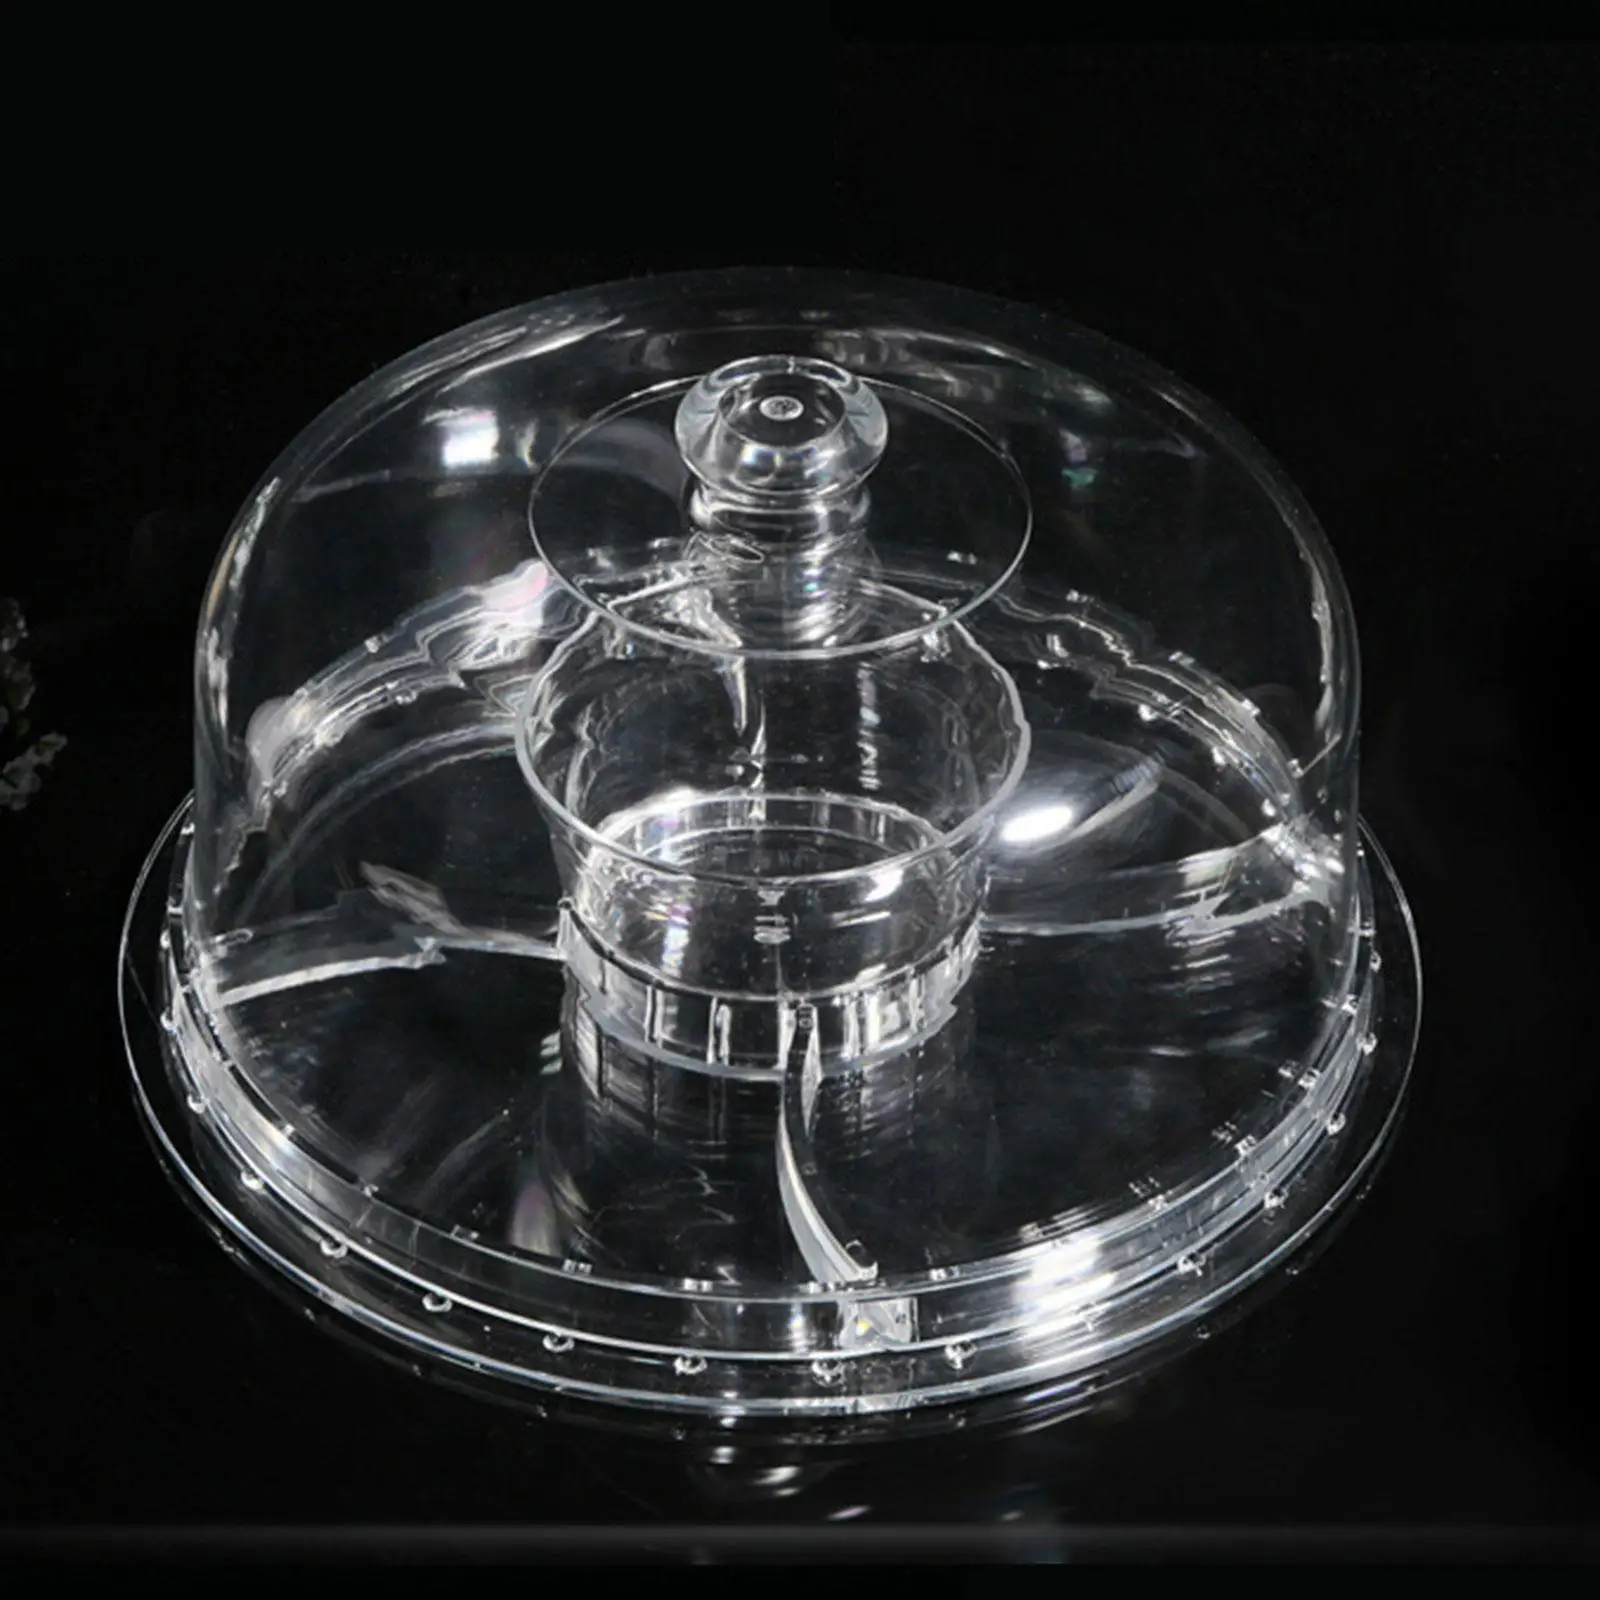 Snack Tray Serving Tray Clear Cupcake Holder Dessert Plate for Muffins Pastries Appetizers Baby Shower Wedding Centerpieces